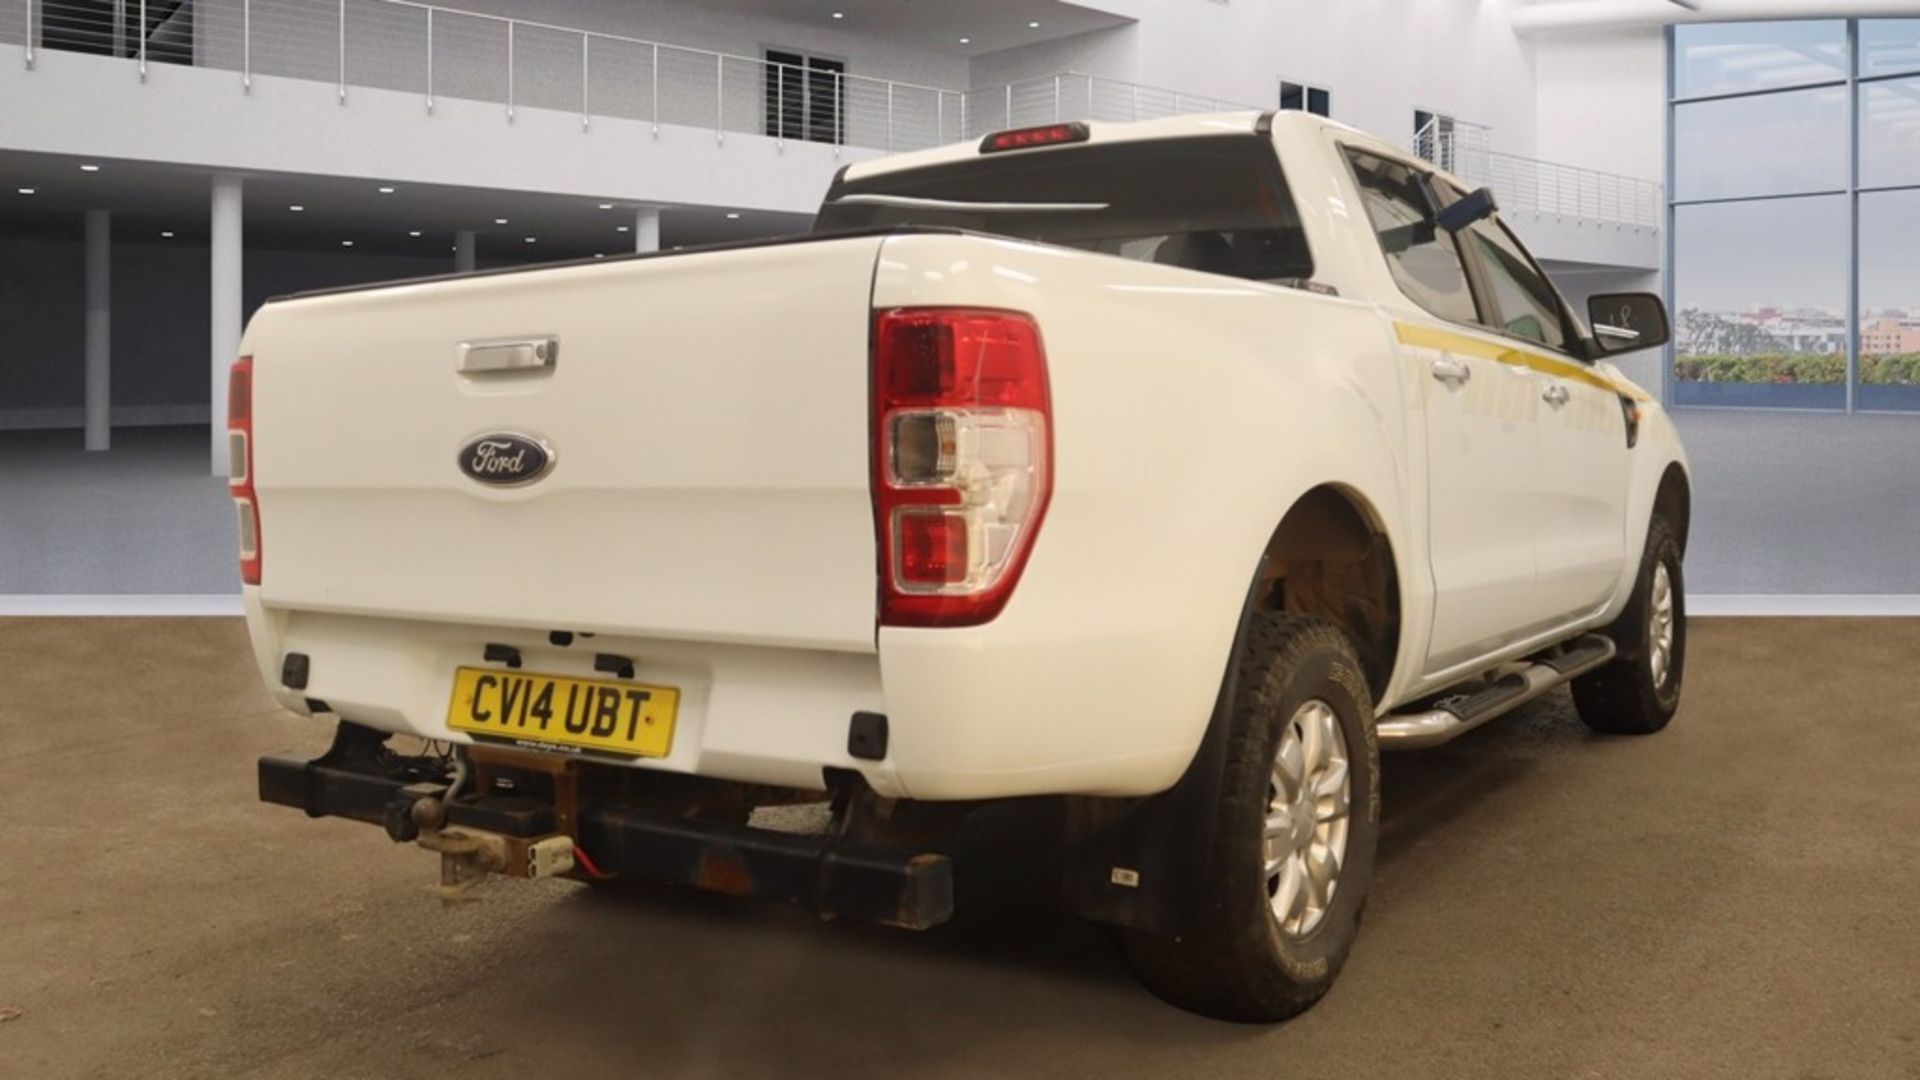 ** ON SALE ** Ford Ranger 2.2 TDCI 150 XLT 4WD Double Cab 2014 '14 Reg' A/C - 75,690 Miles Only - Image 3 of 9